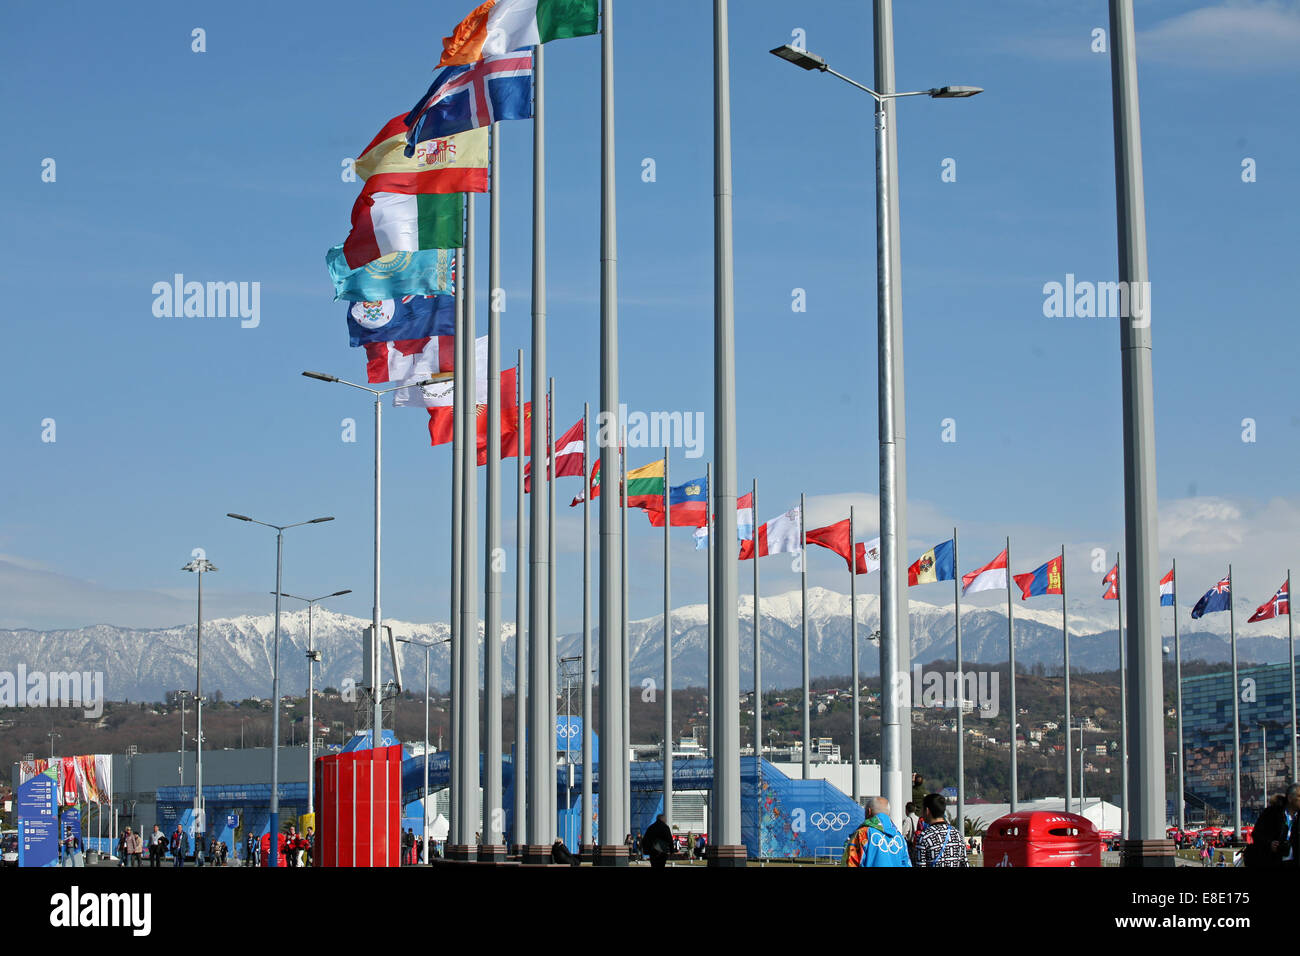 Curve of international flags mountains in the background Sochi Stock Photo